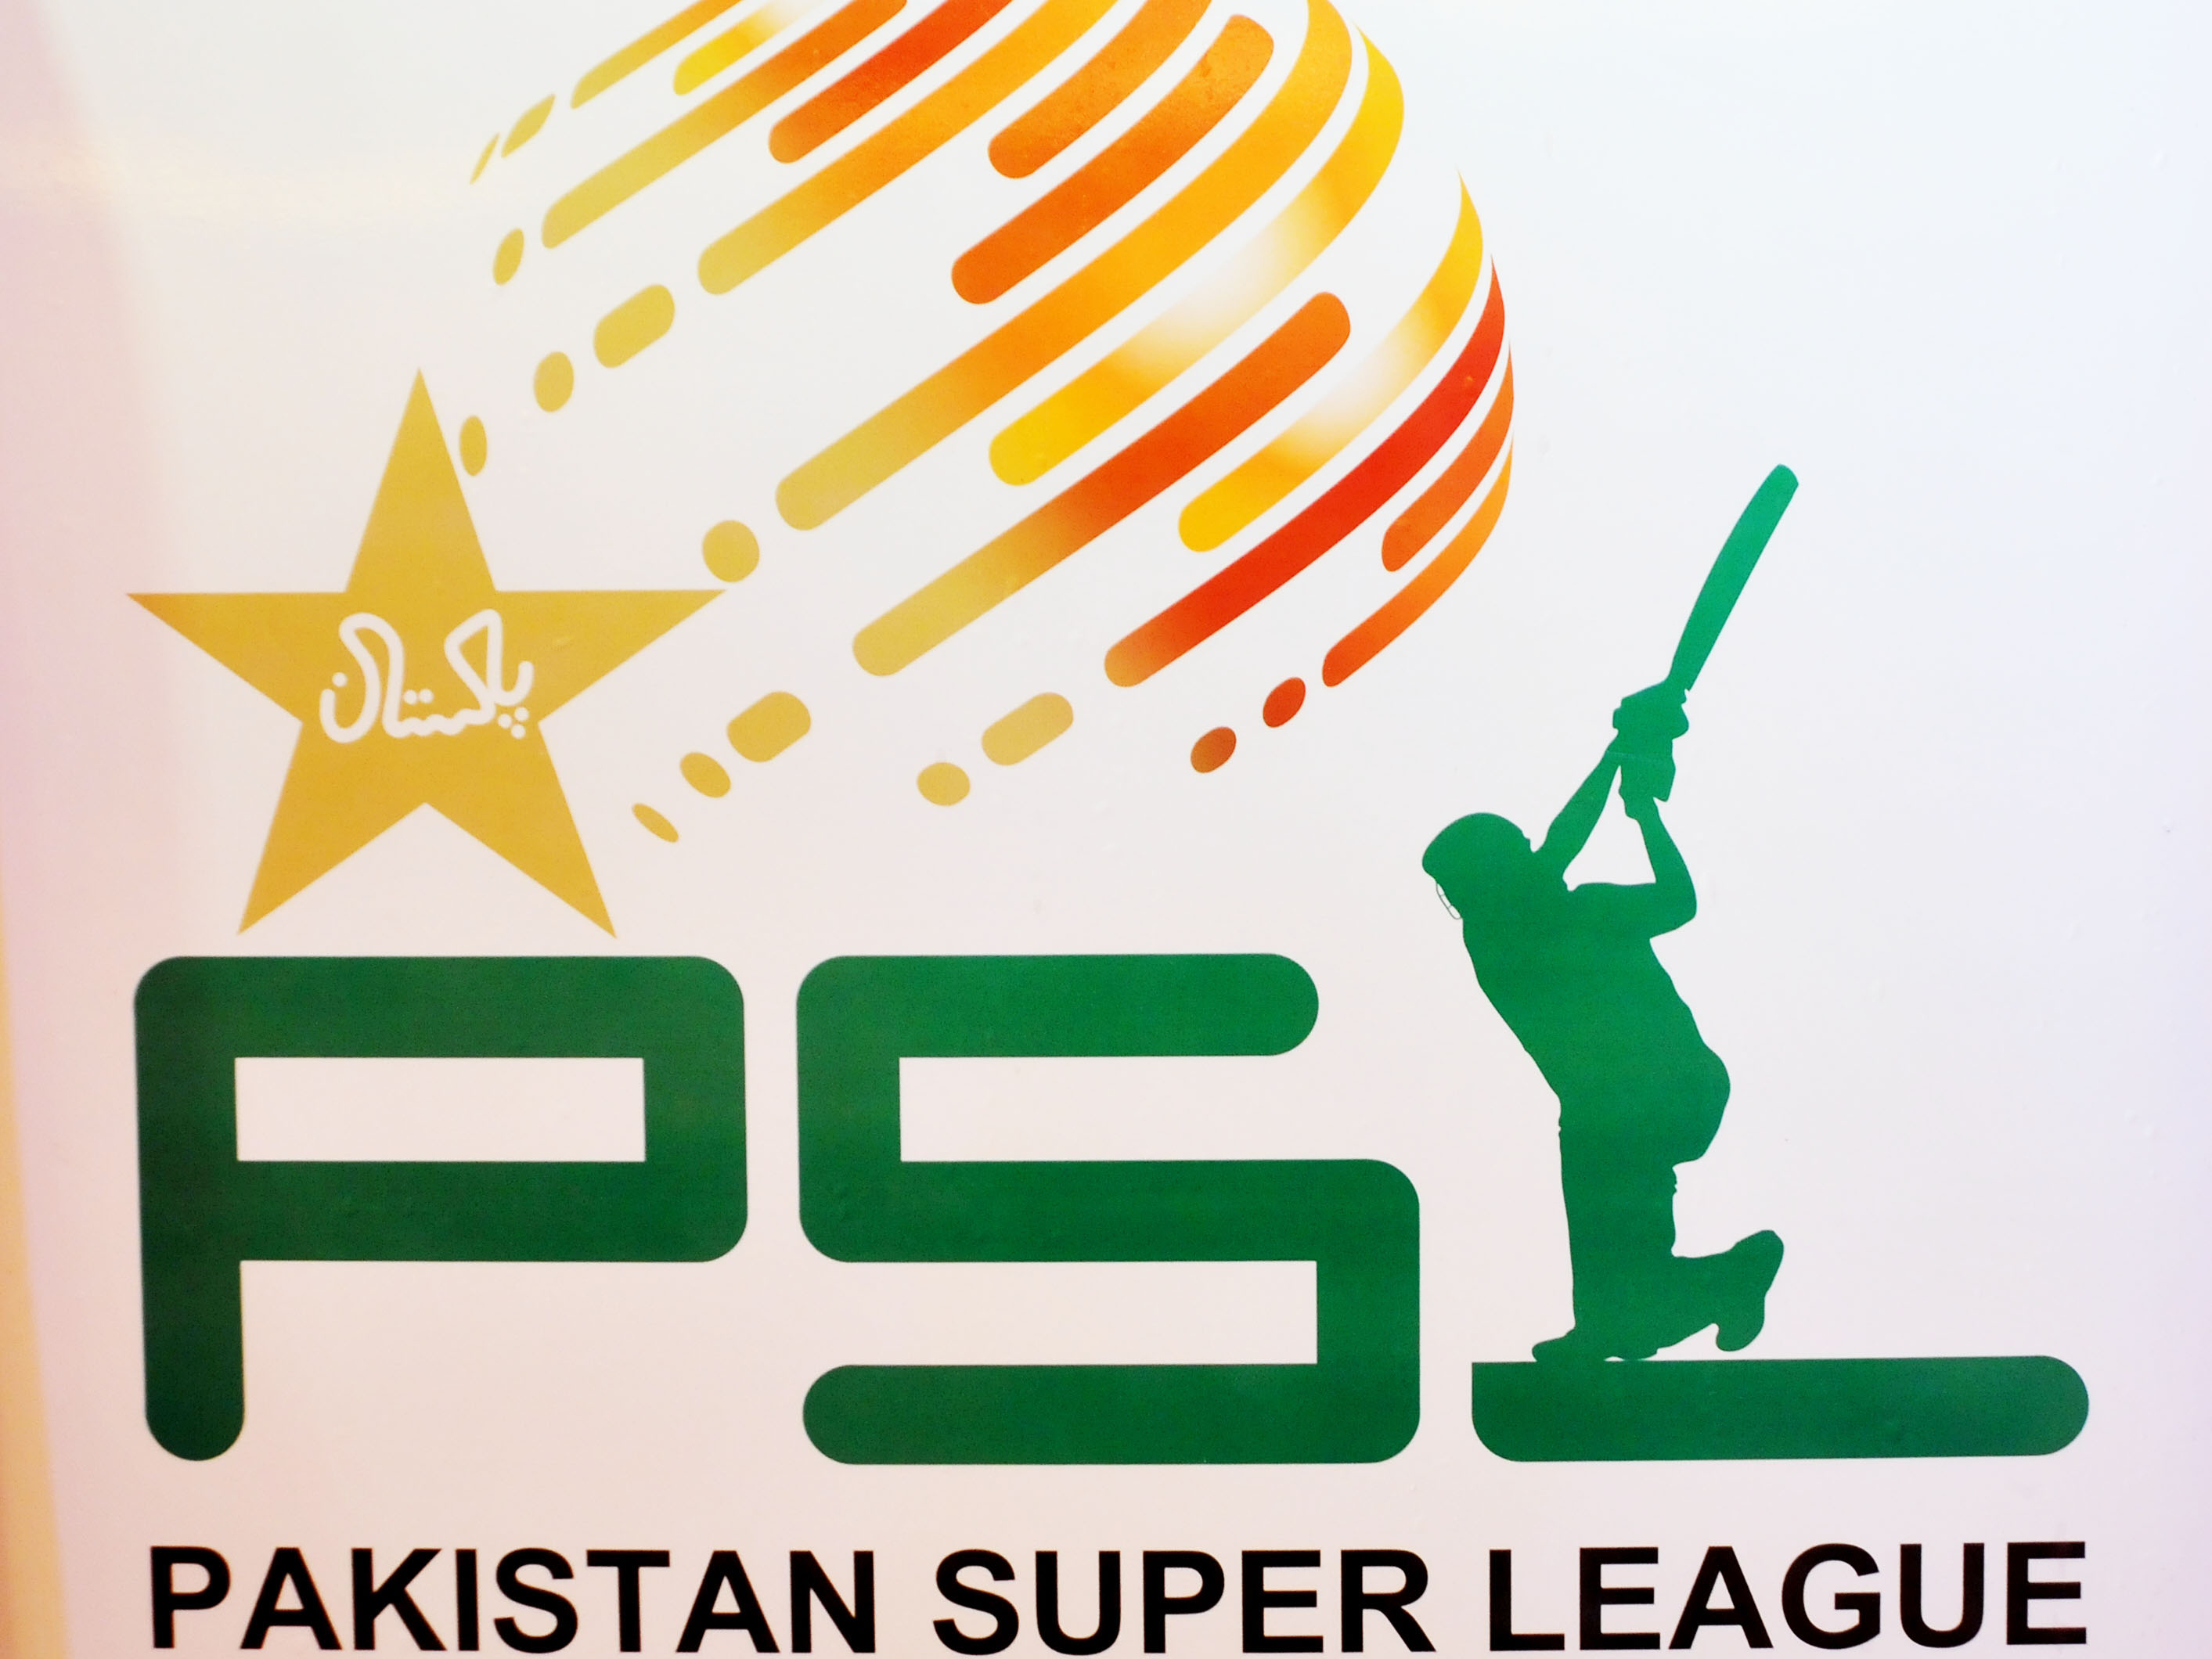 pakistani umpires aleem dar and asad rauf will also officiate in the psl photo zahoorul haq express file